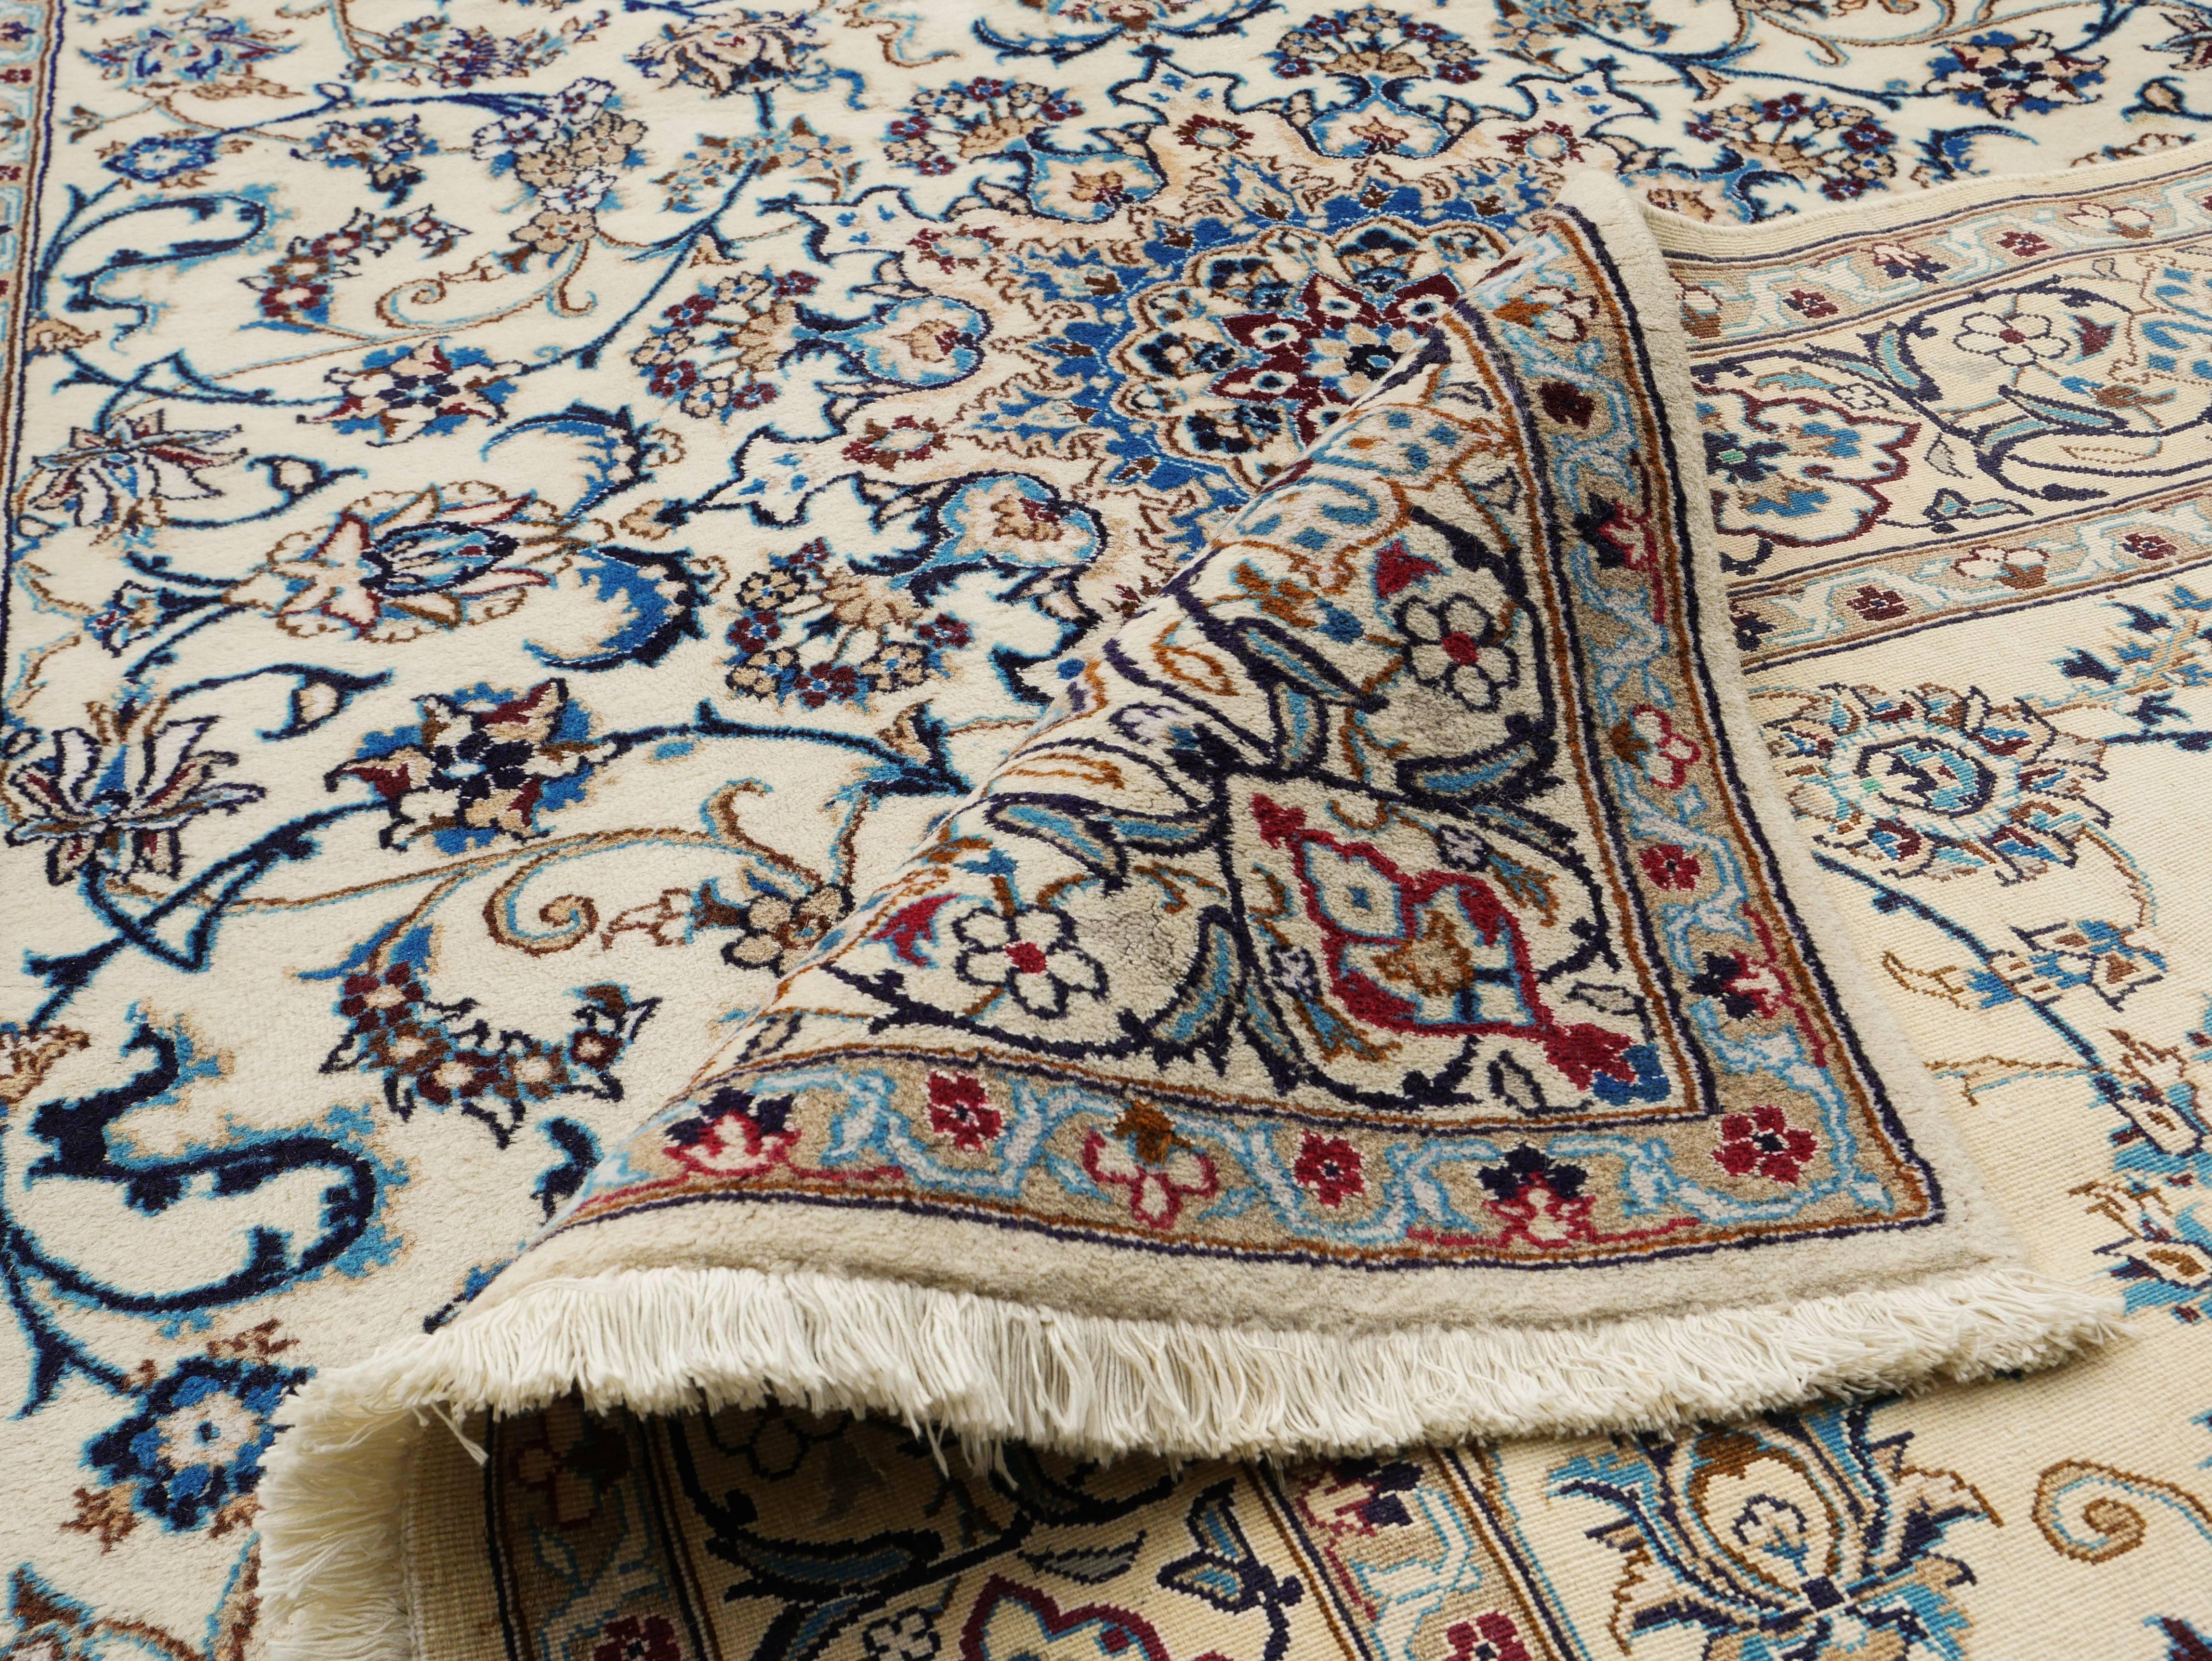 Persian Nain 290 x 190cm c. 9.5 by 6.2 feet For Sale 2